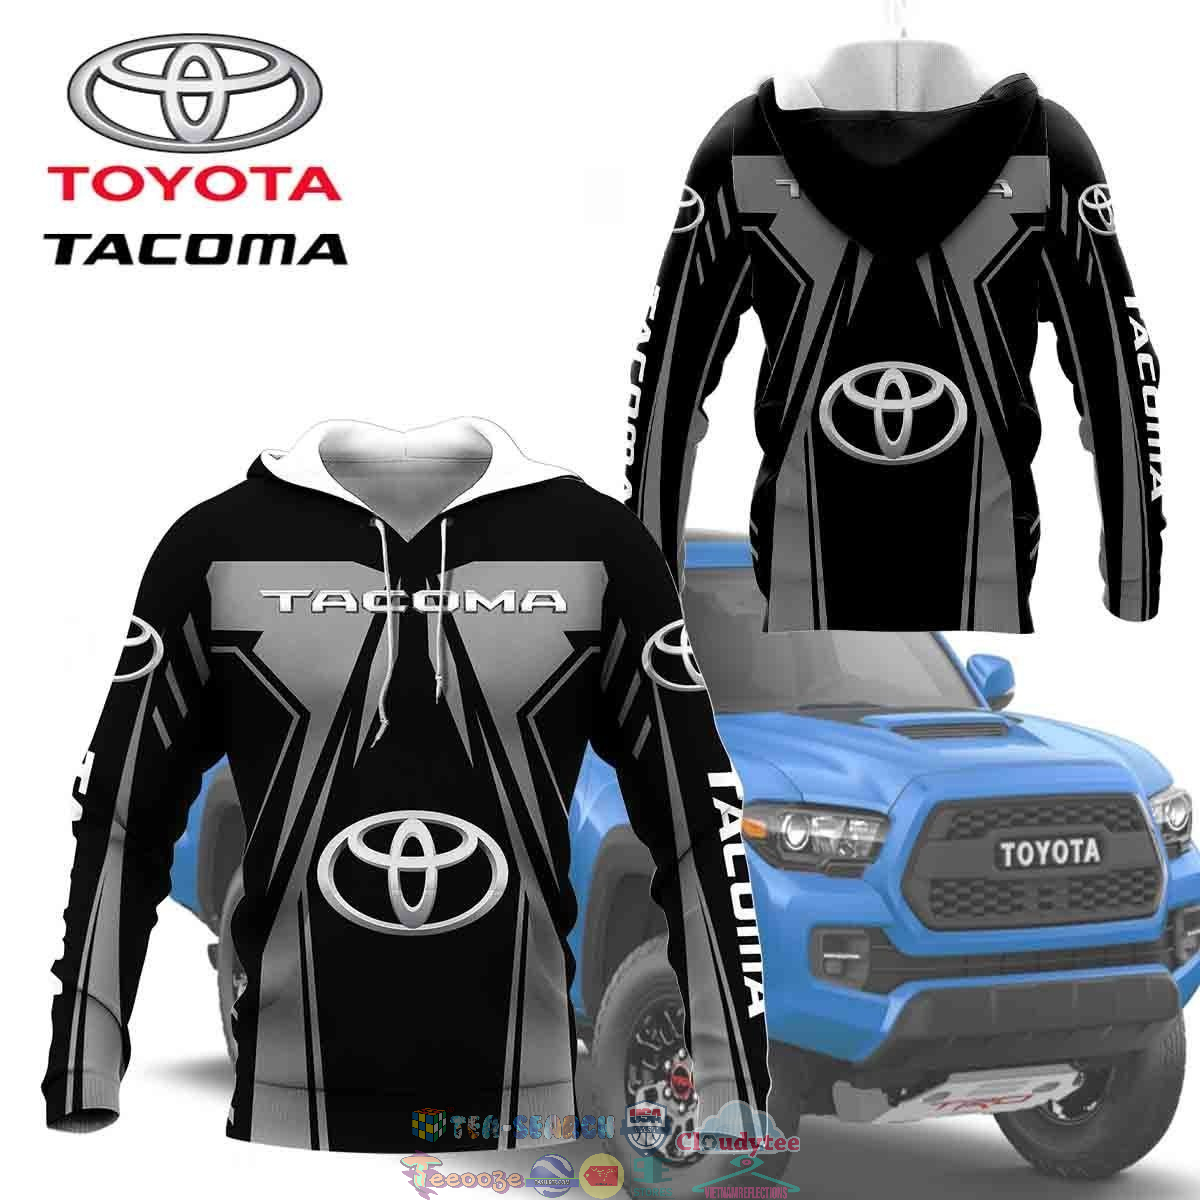 Toyota Tacoma ver 18 3D hoodie and t-shirt